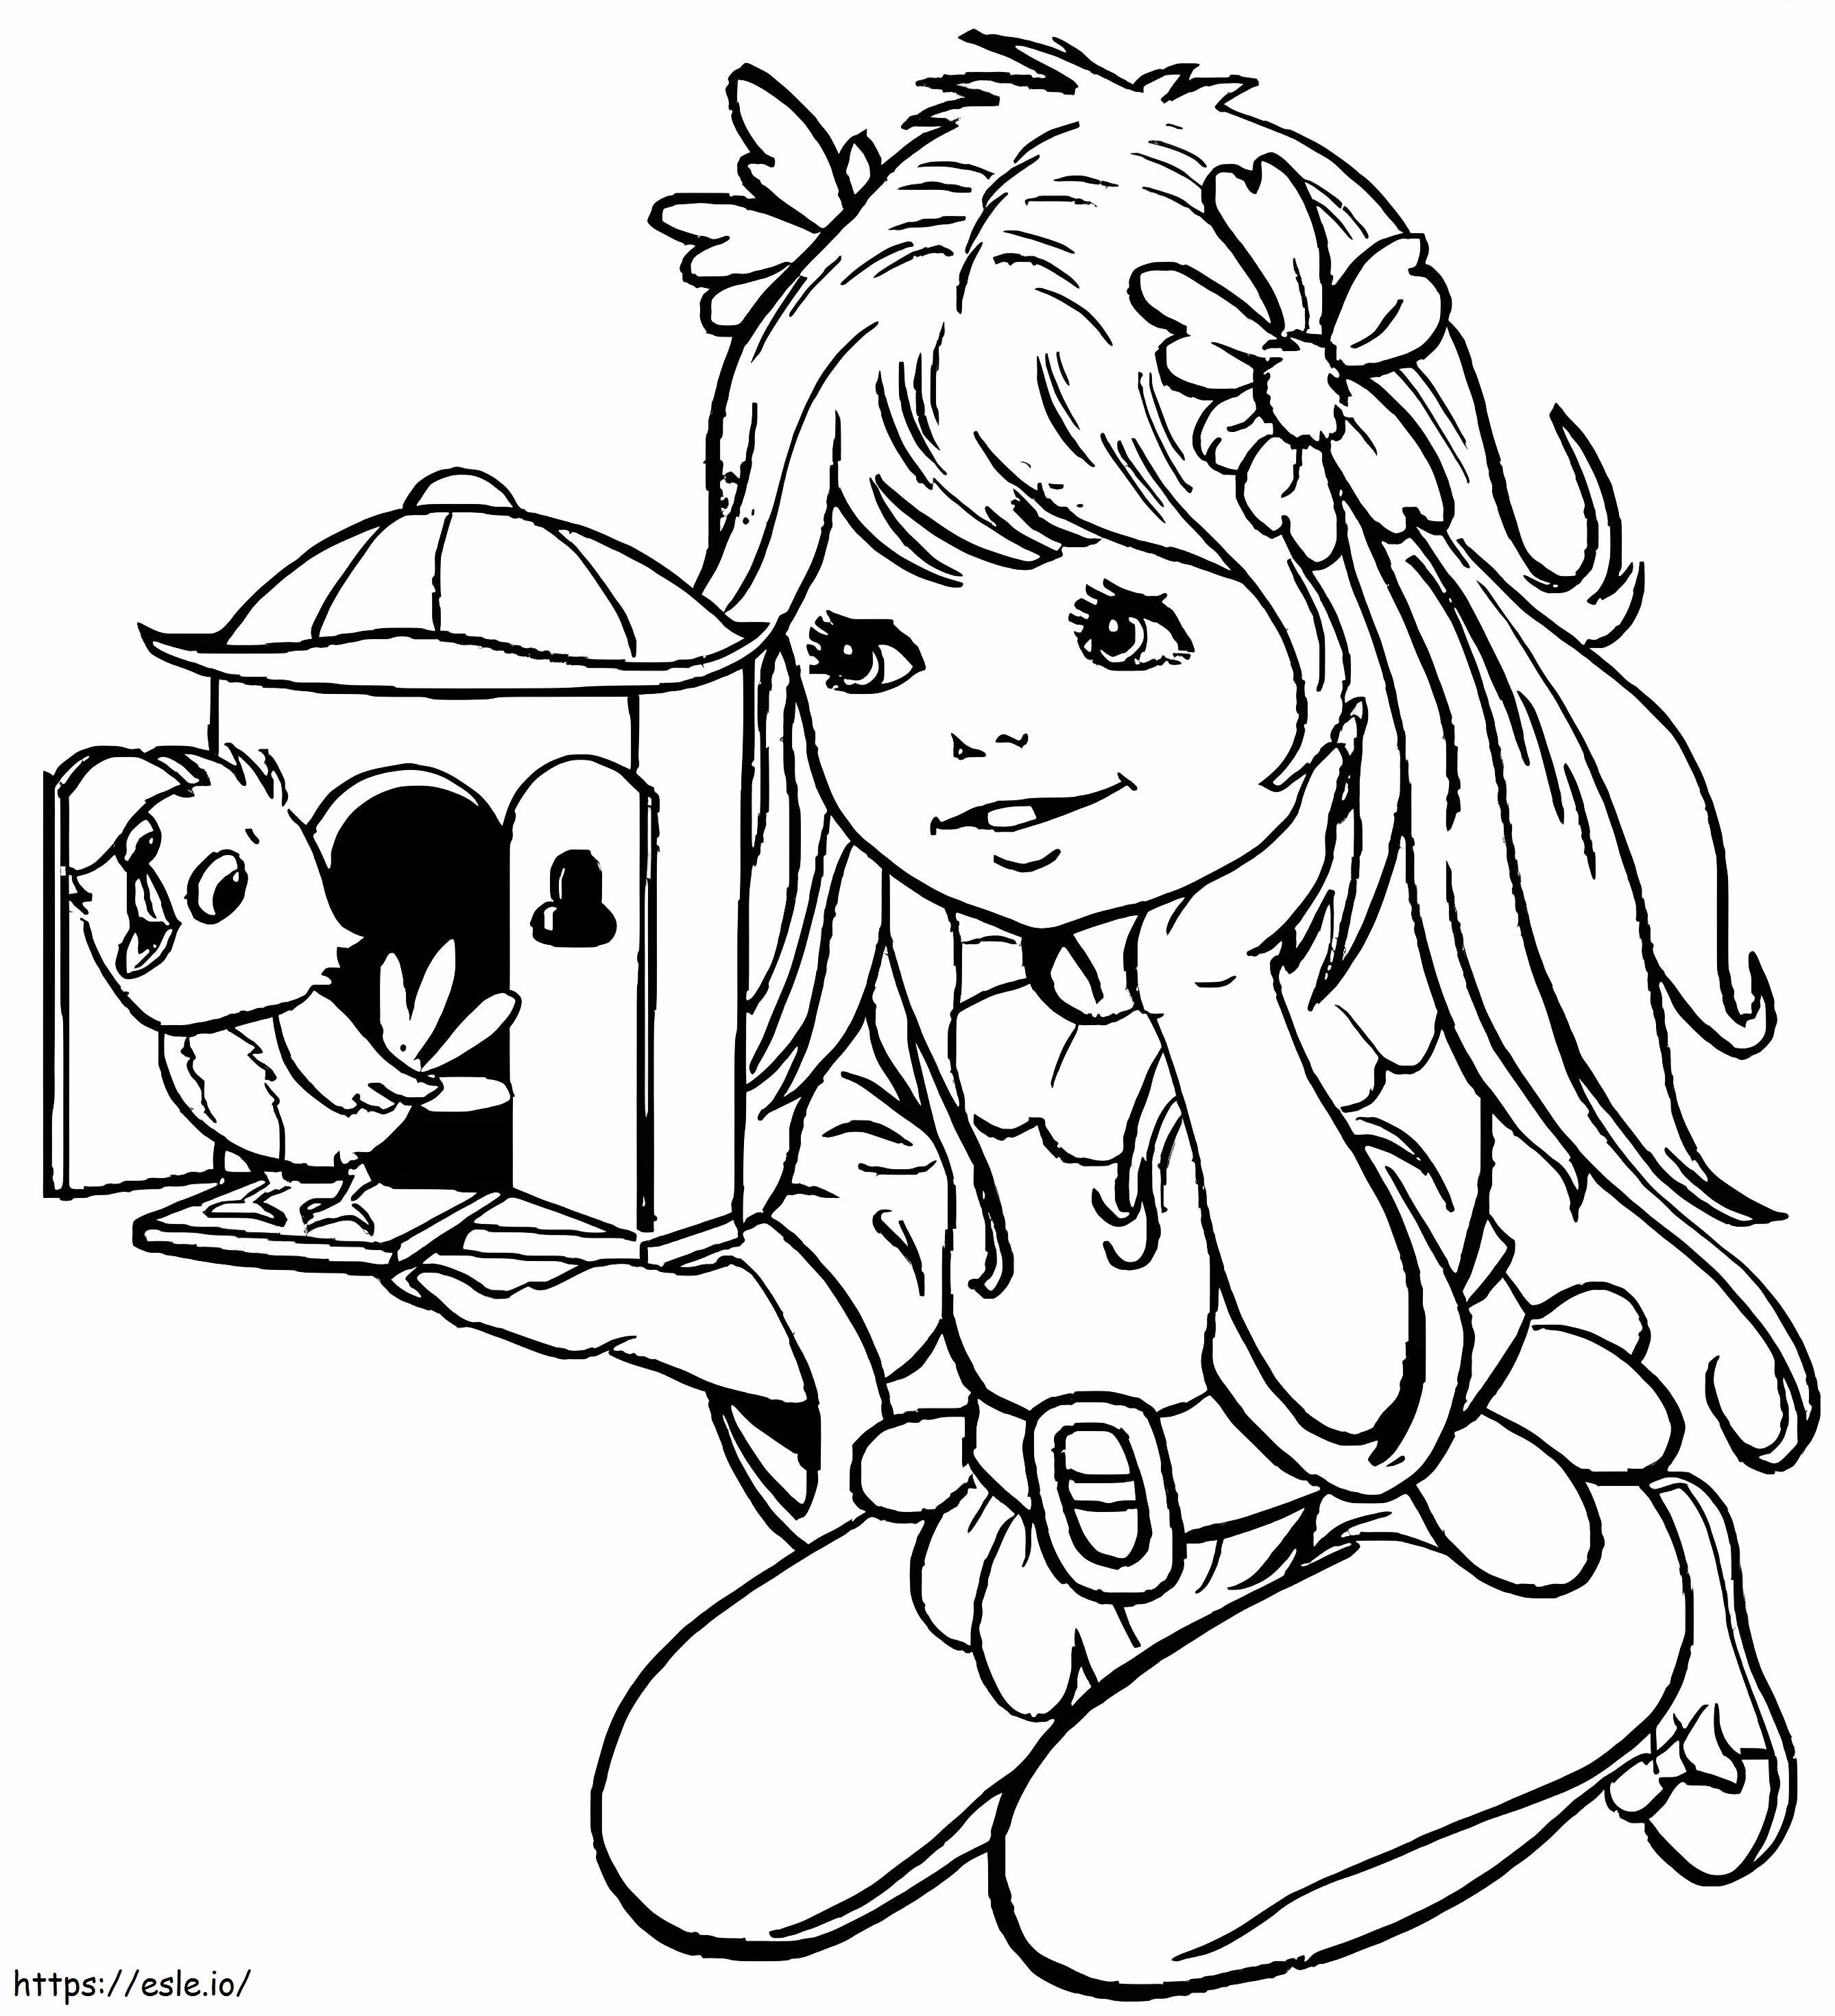 Girl And Bird coloring page